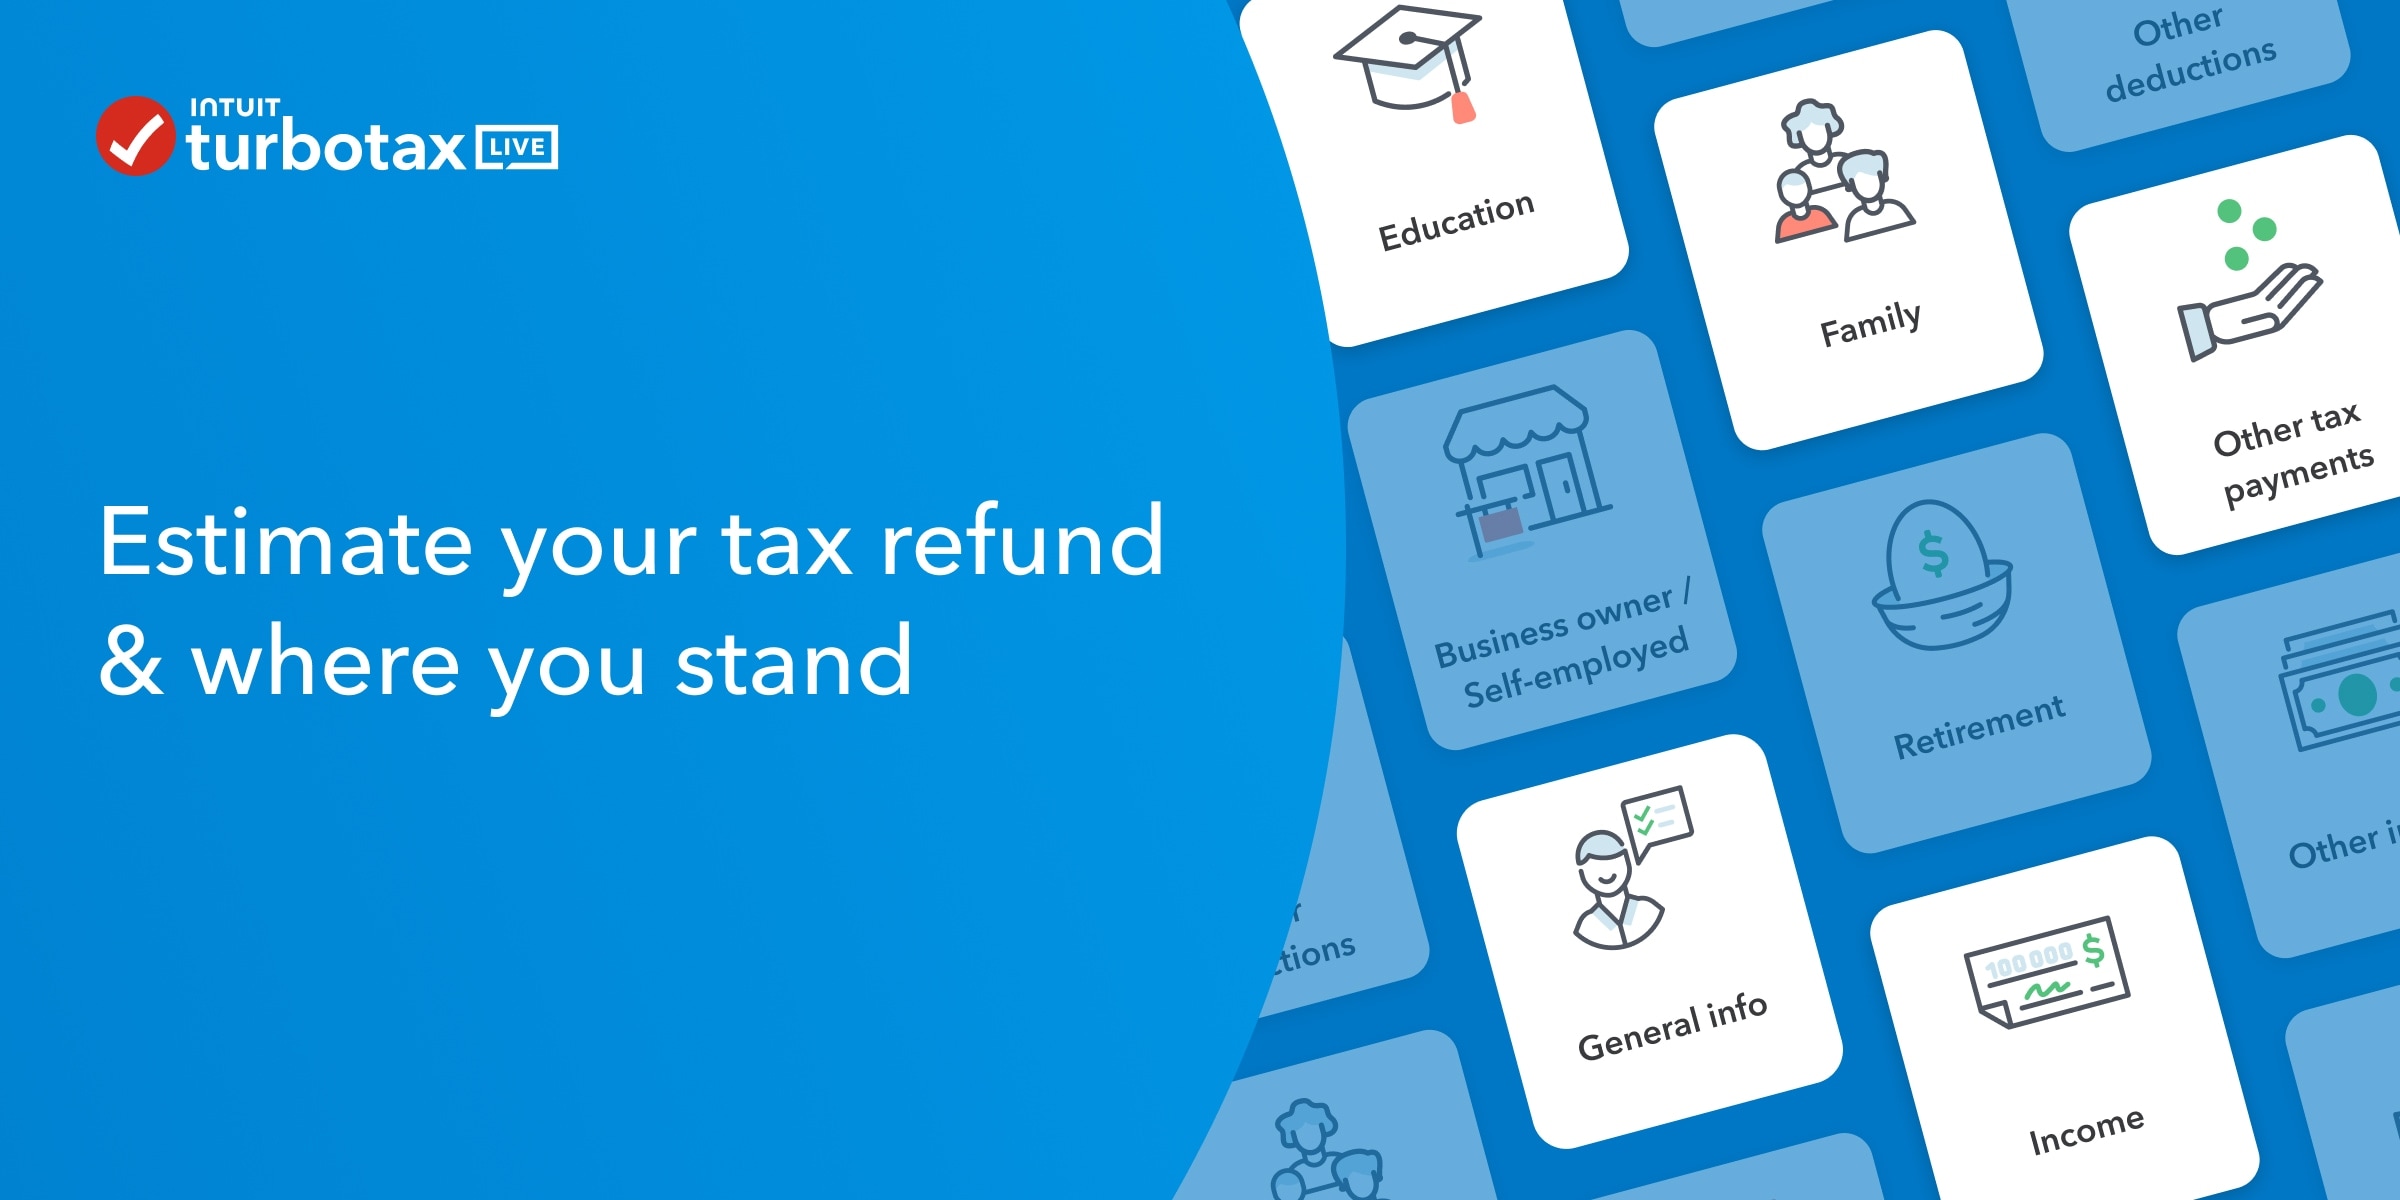 Can purchases be used to reduce income tax and potentially lead to a larger refund?
